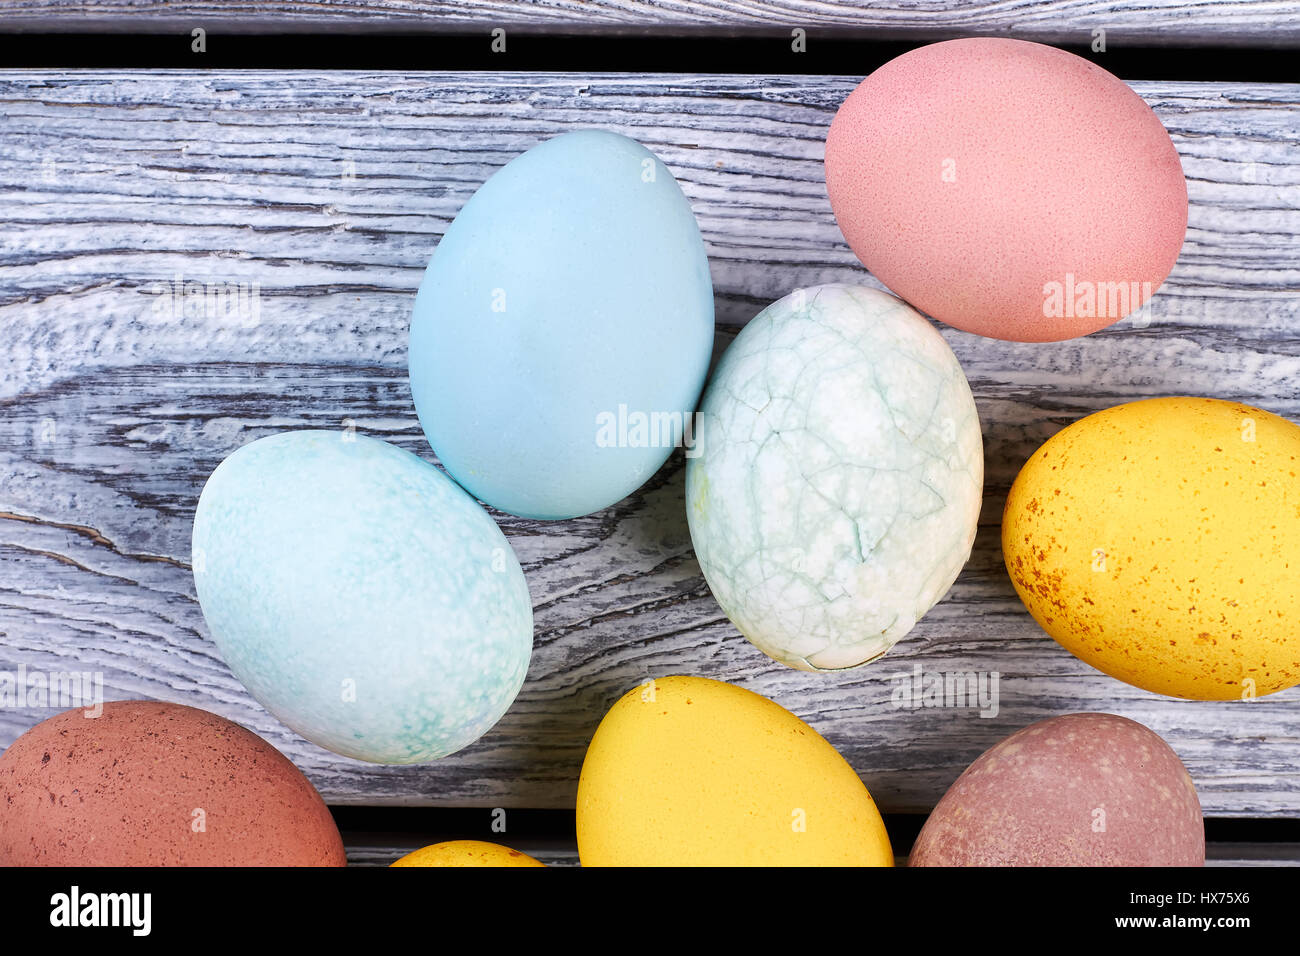 Bunch of colored eggs. Stock Photo